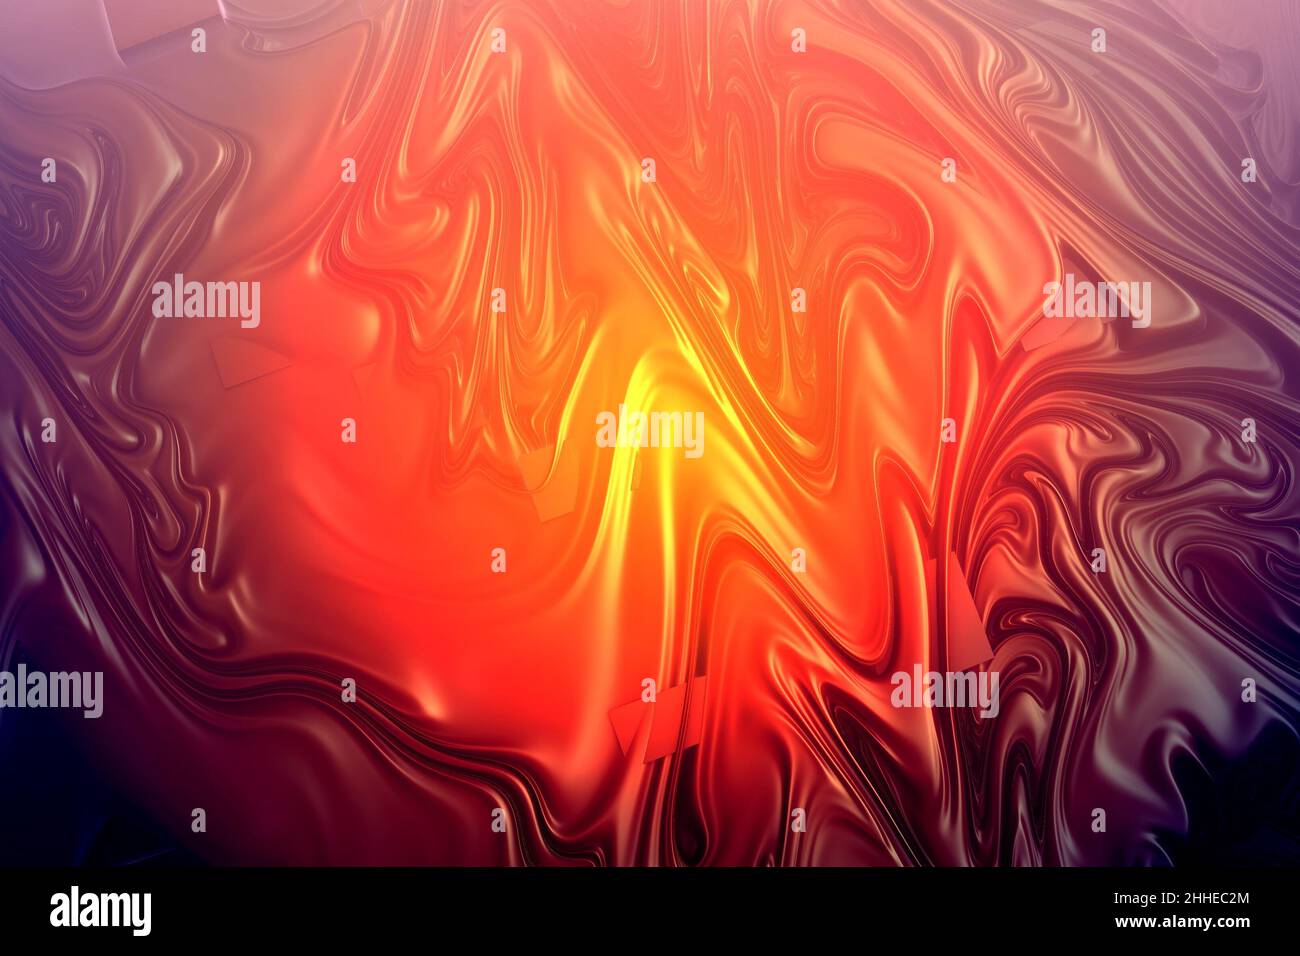 volcanic lava concept in red and orange color, 3d fractal background. decorative image for design Stock Photo